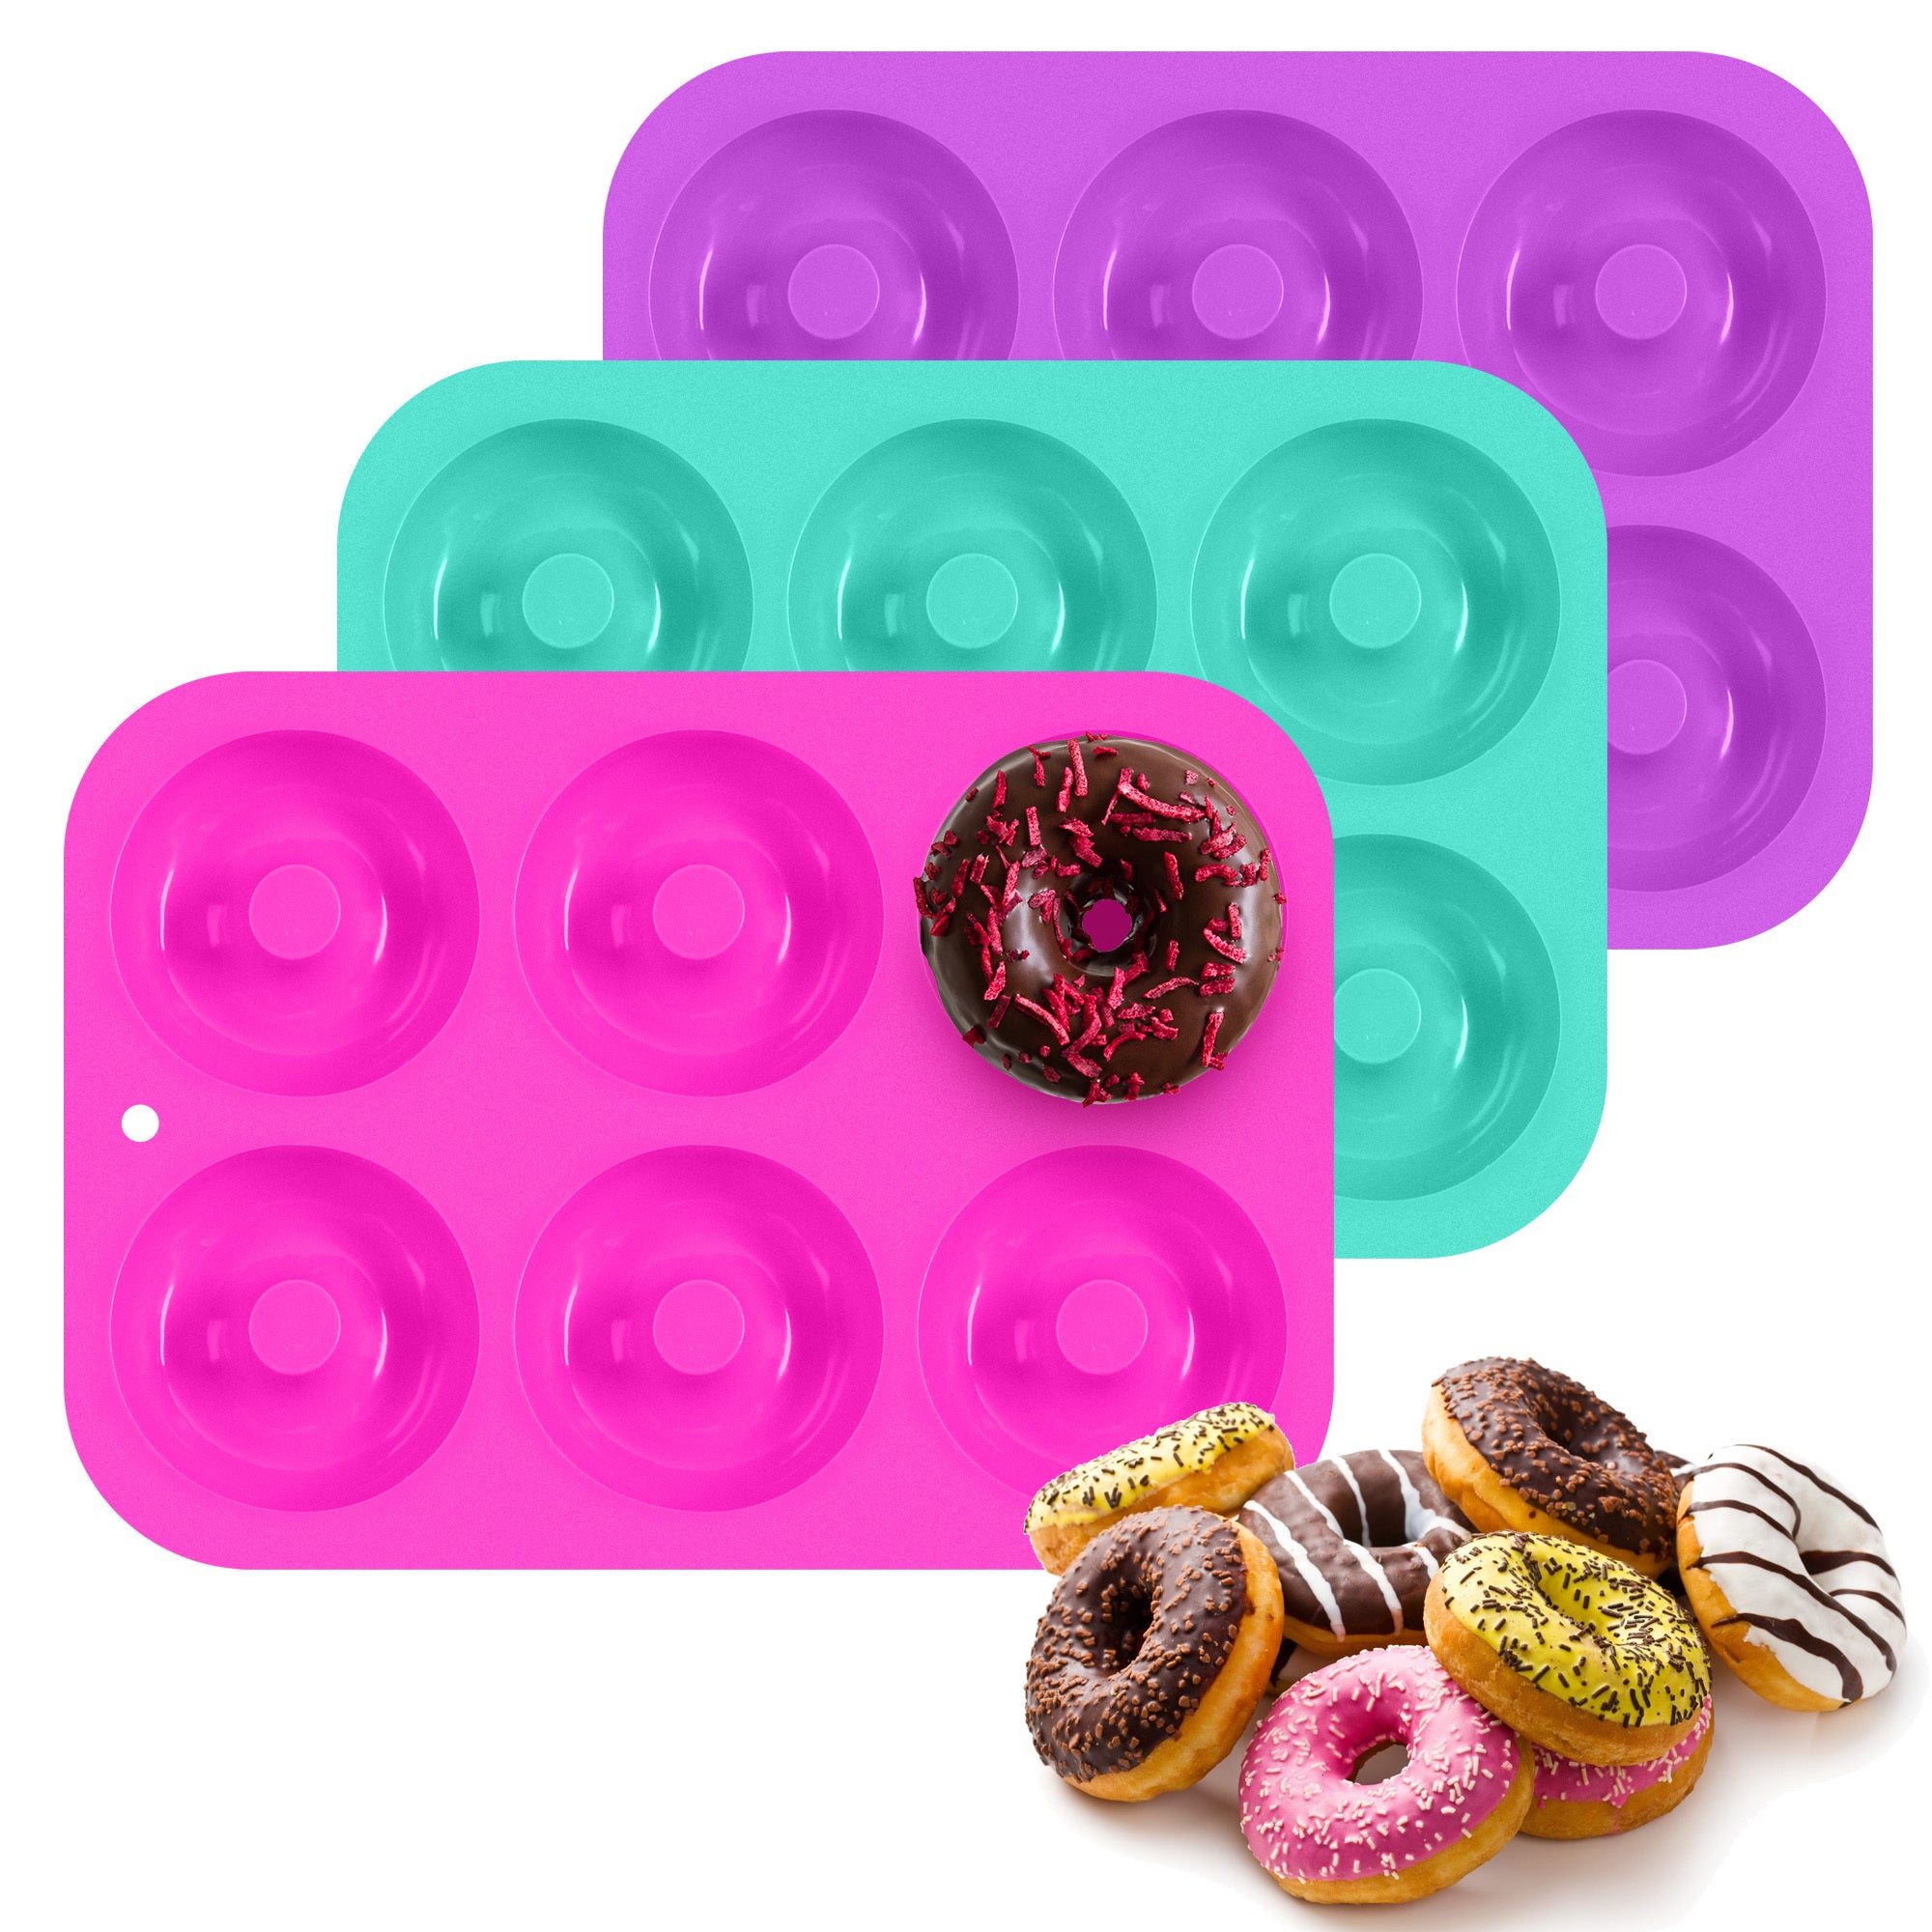 24 Pack Silicone Molds, Muffin Donut Mold Non-stick Heat Resistant